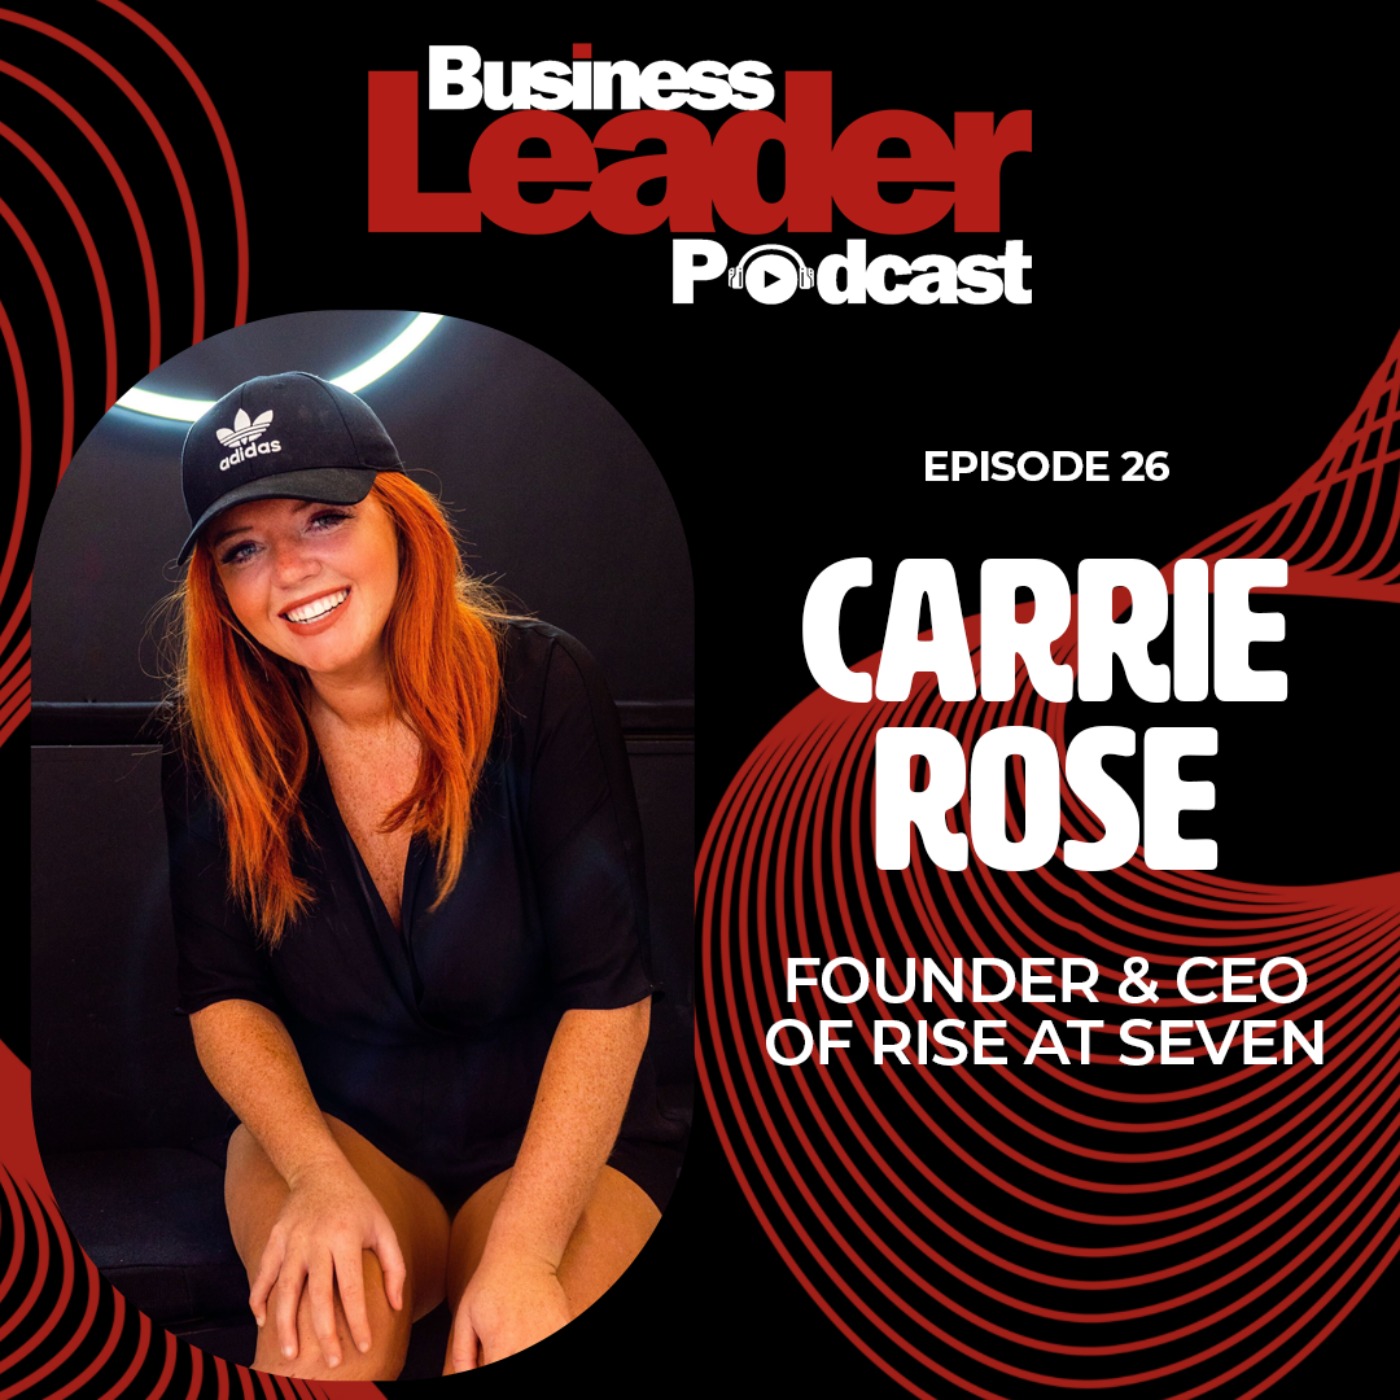 Carrie Rose: founder and CEO of Rise at Seven